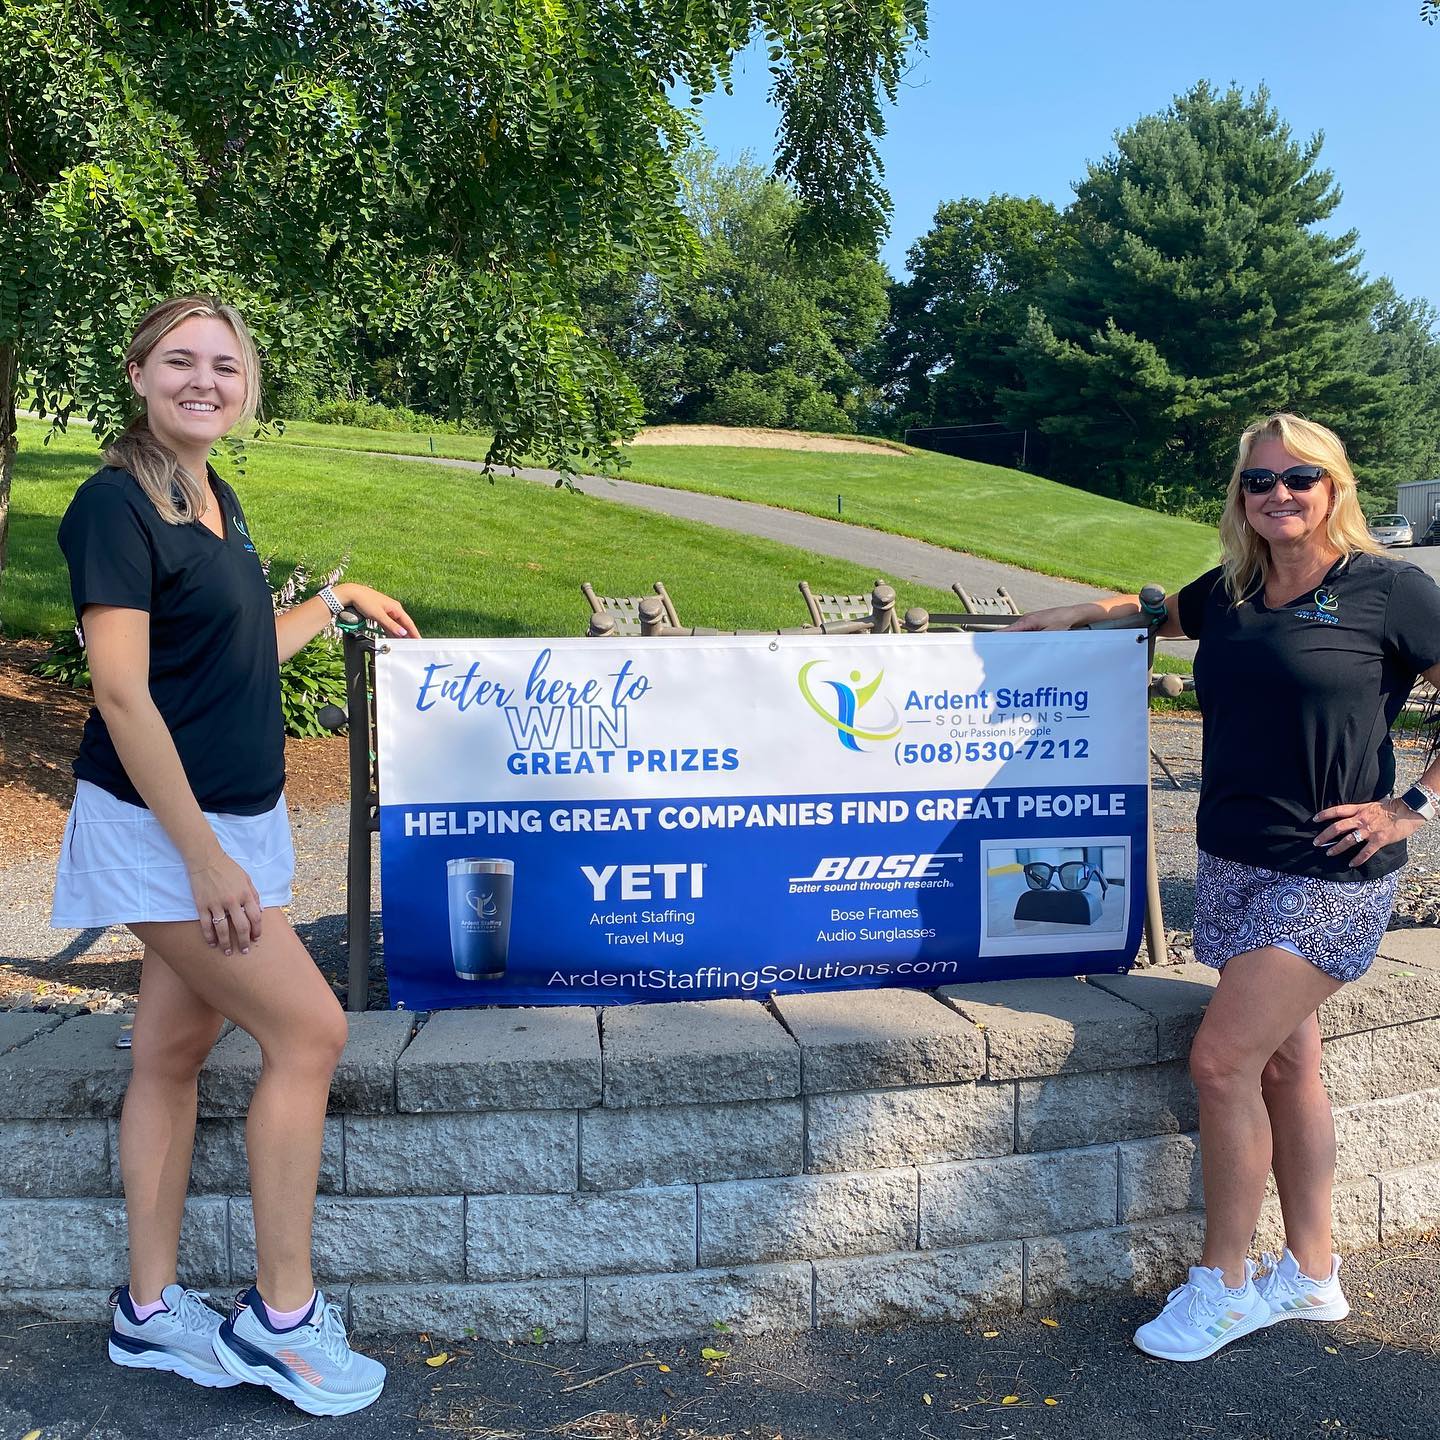 Hey all you @marlboroughchamber golfers, stop by the Ardent Staffing tent and register for free to win one of two pairs of Bose Frames sunglasses